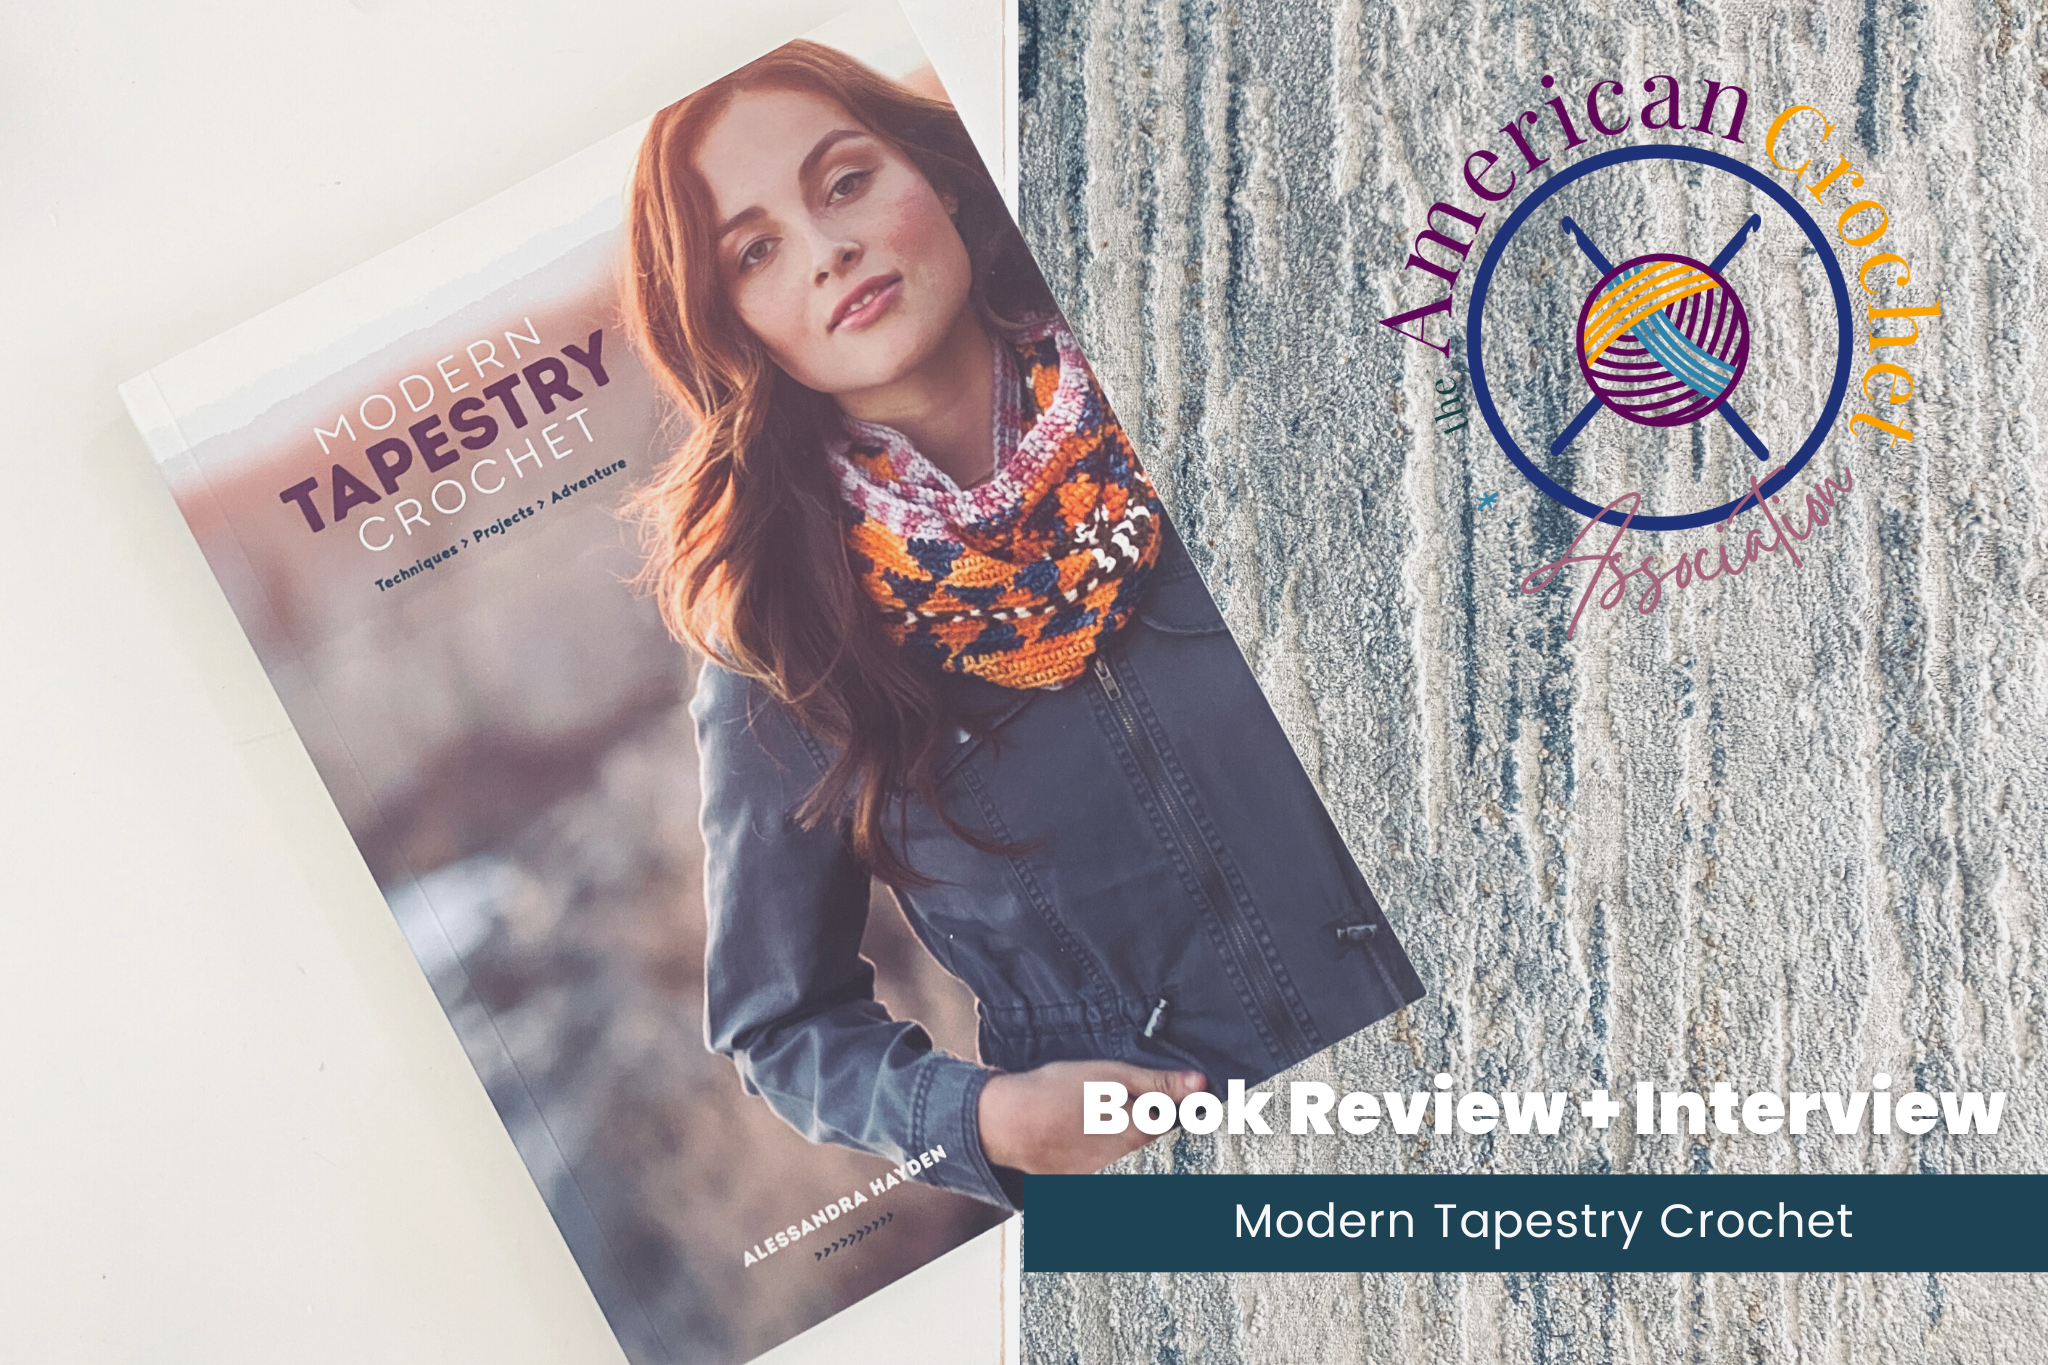 Modern Tapestry Crochet: Book Review and Interview with Alessandra Hayden